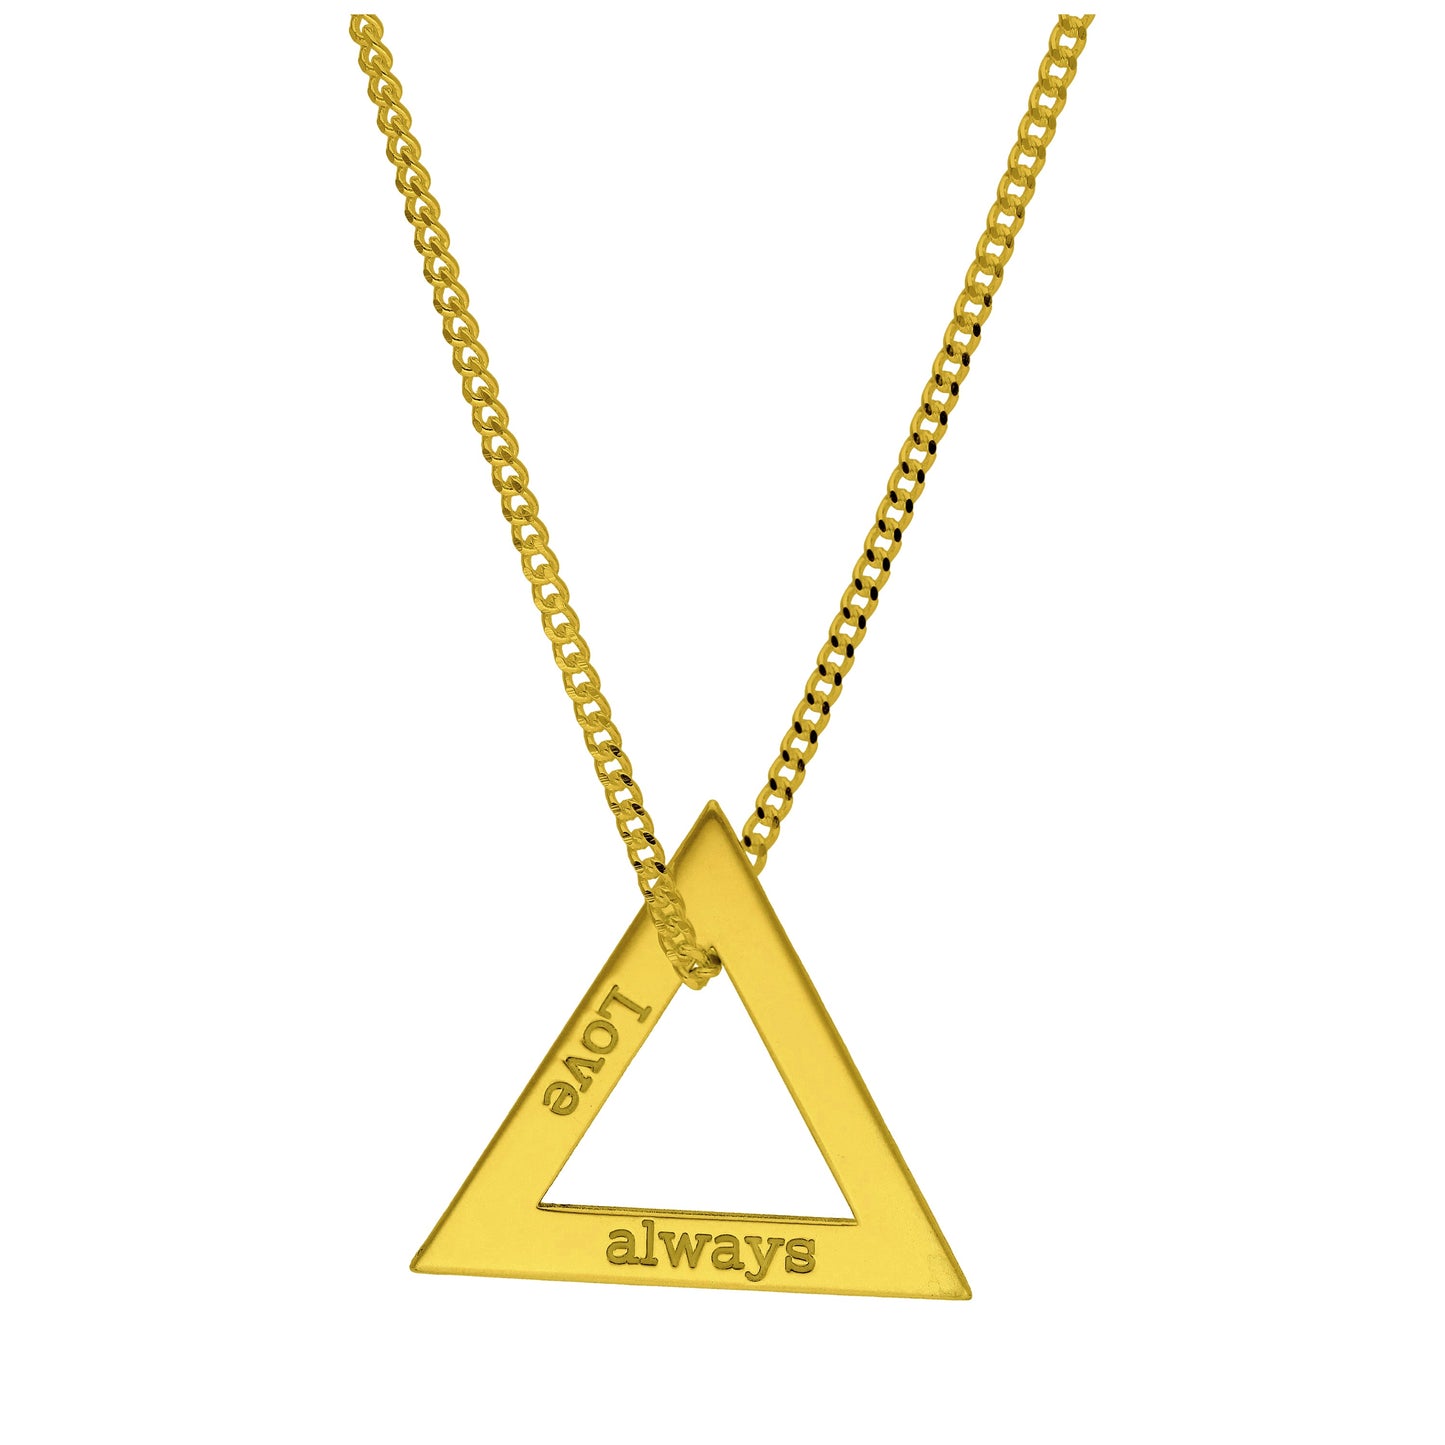 Bespoke Gold Plated Sterling Silver Triangle Name Necklace 16 - 24 Inches